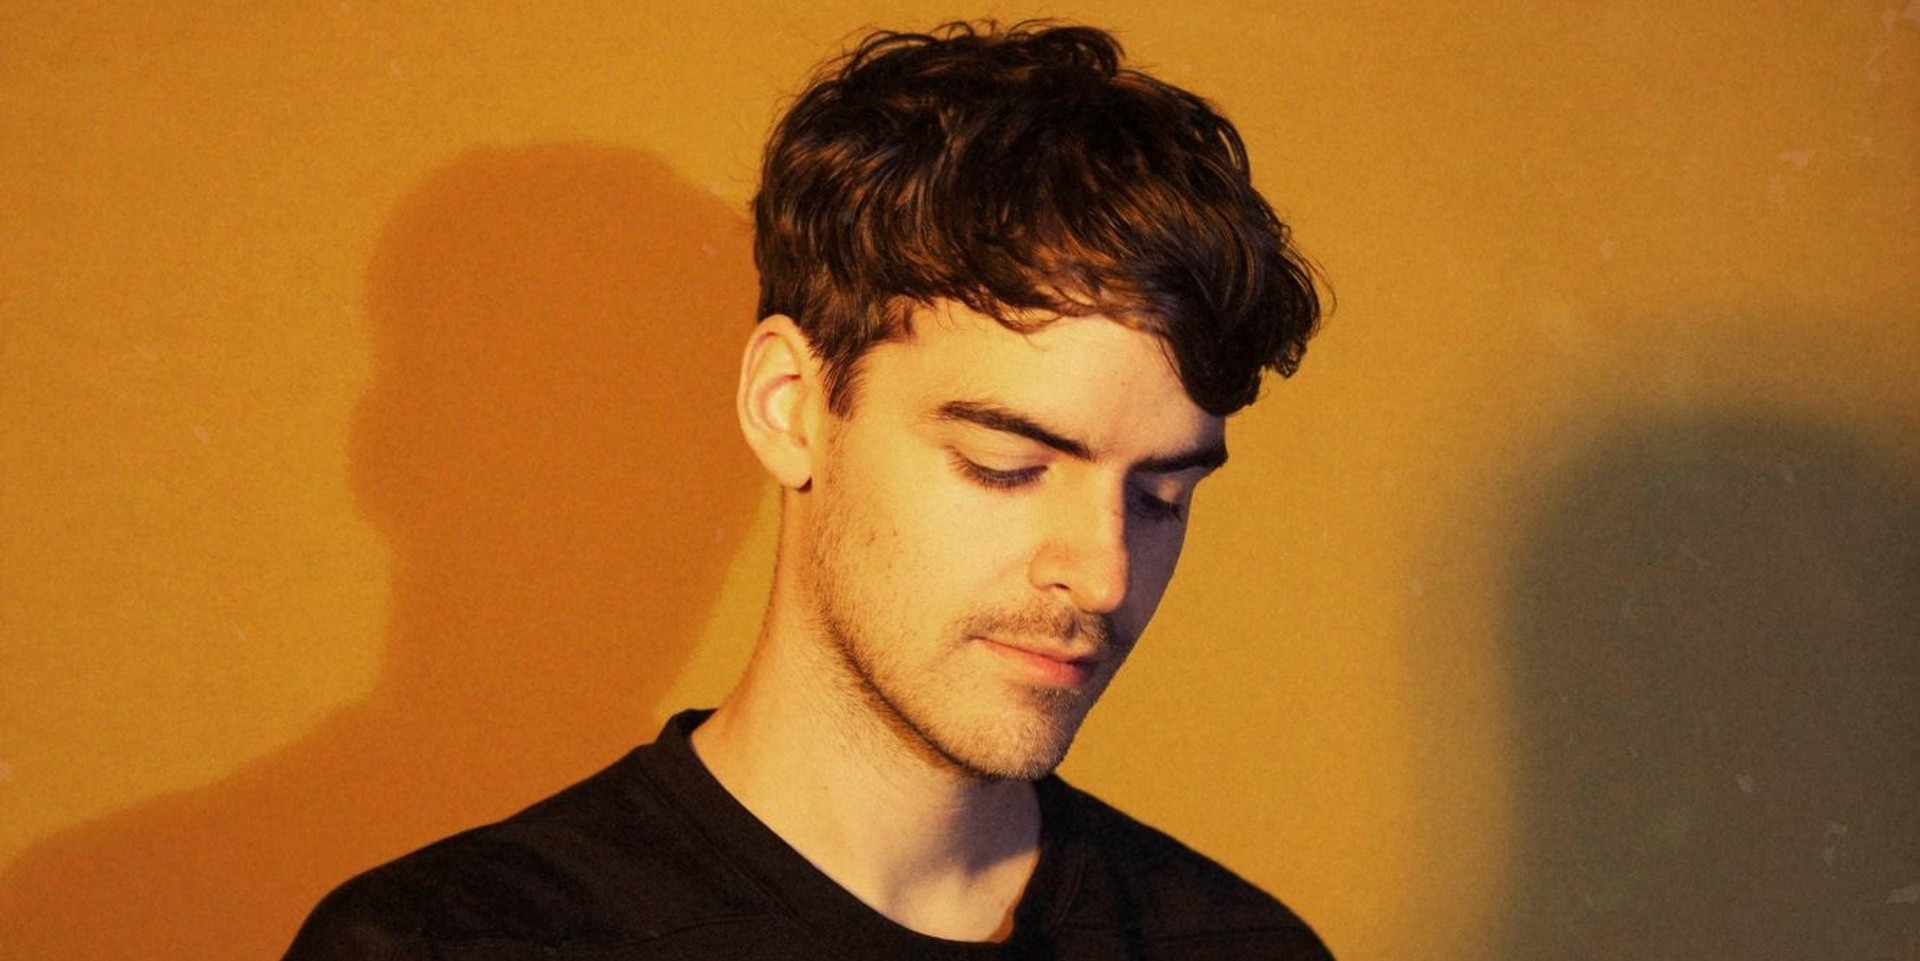 Ryan Hemsworth is heading back to Asia for the inaugural Moonbeats Xmas Party